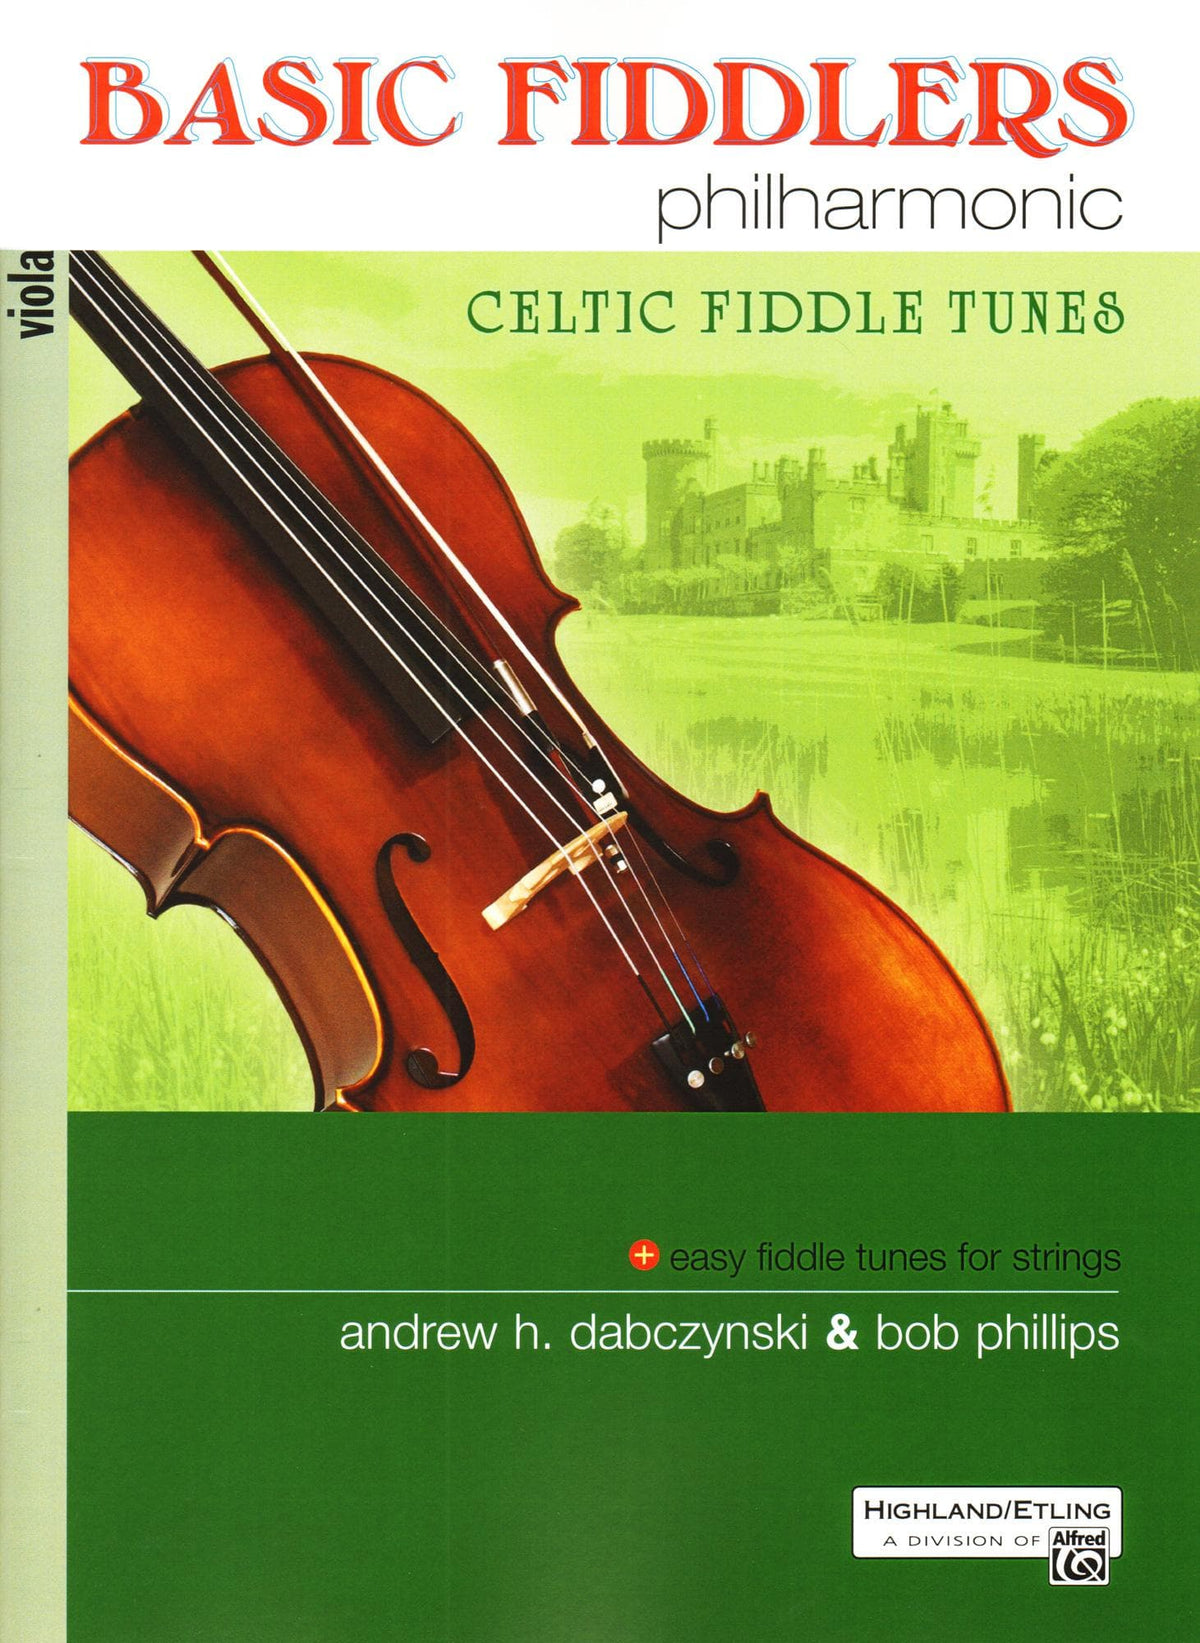 Basic Fiddlers Philharmonic - Celtic Fiddle Tunes - Viola Book - by Dabczynski & Phillips - Alfred Publishing